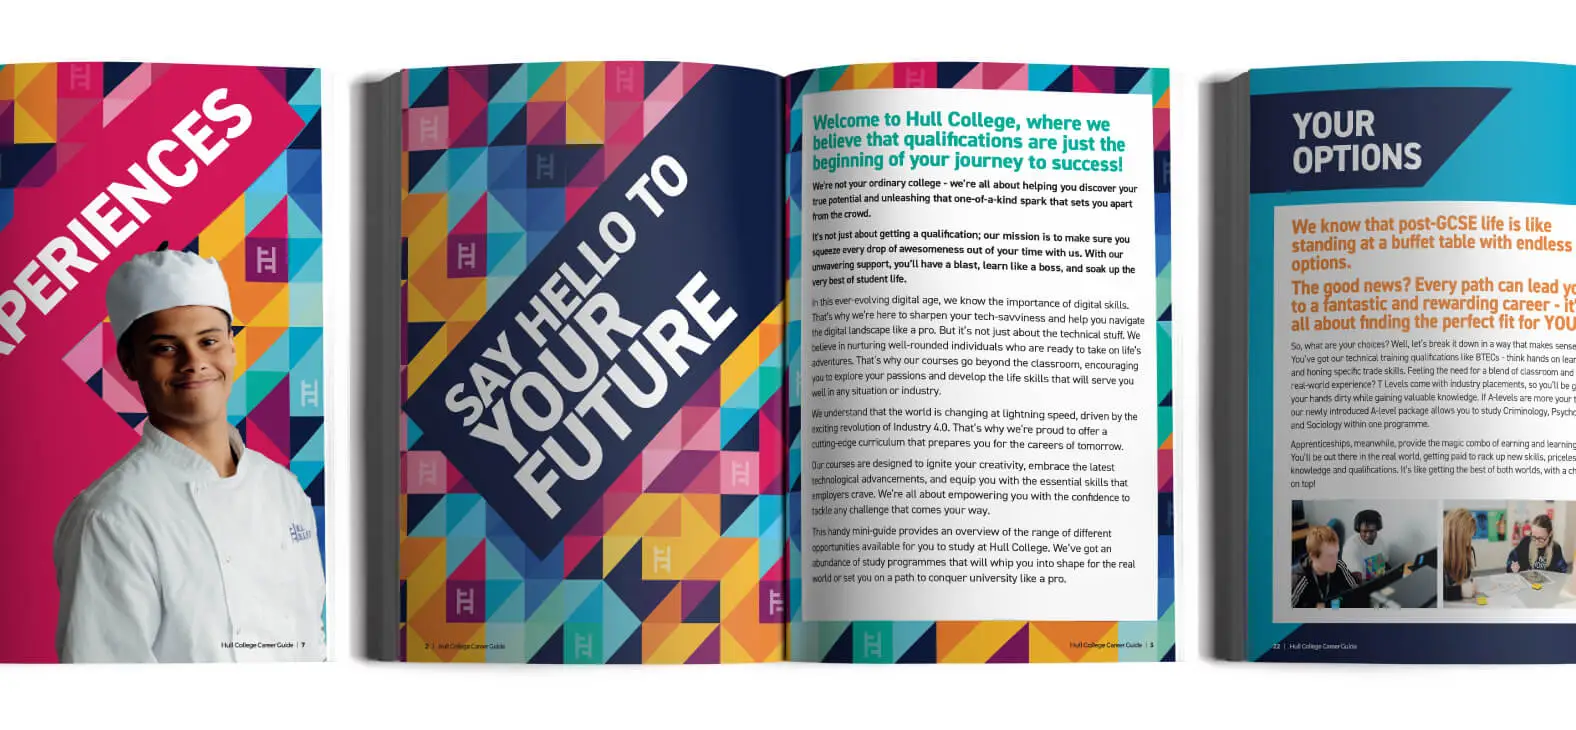 A brochure showcasing Hull College's course guides with a colorful design and a picture of a Hospitality student.